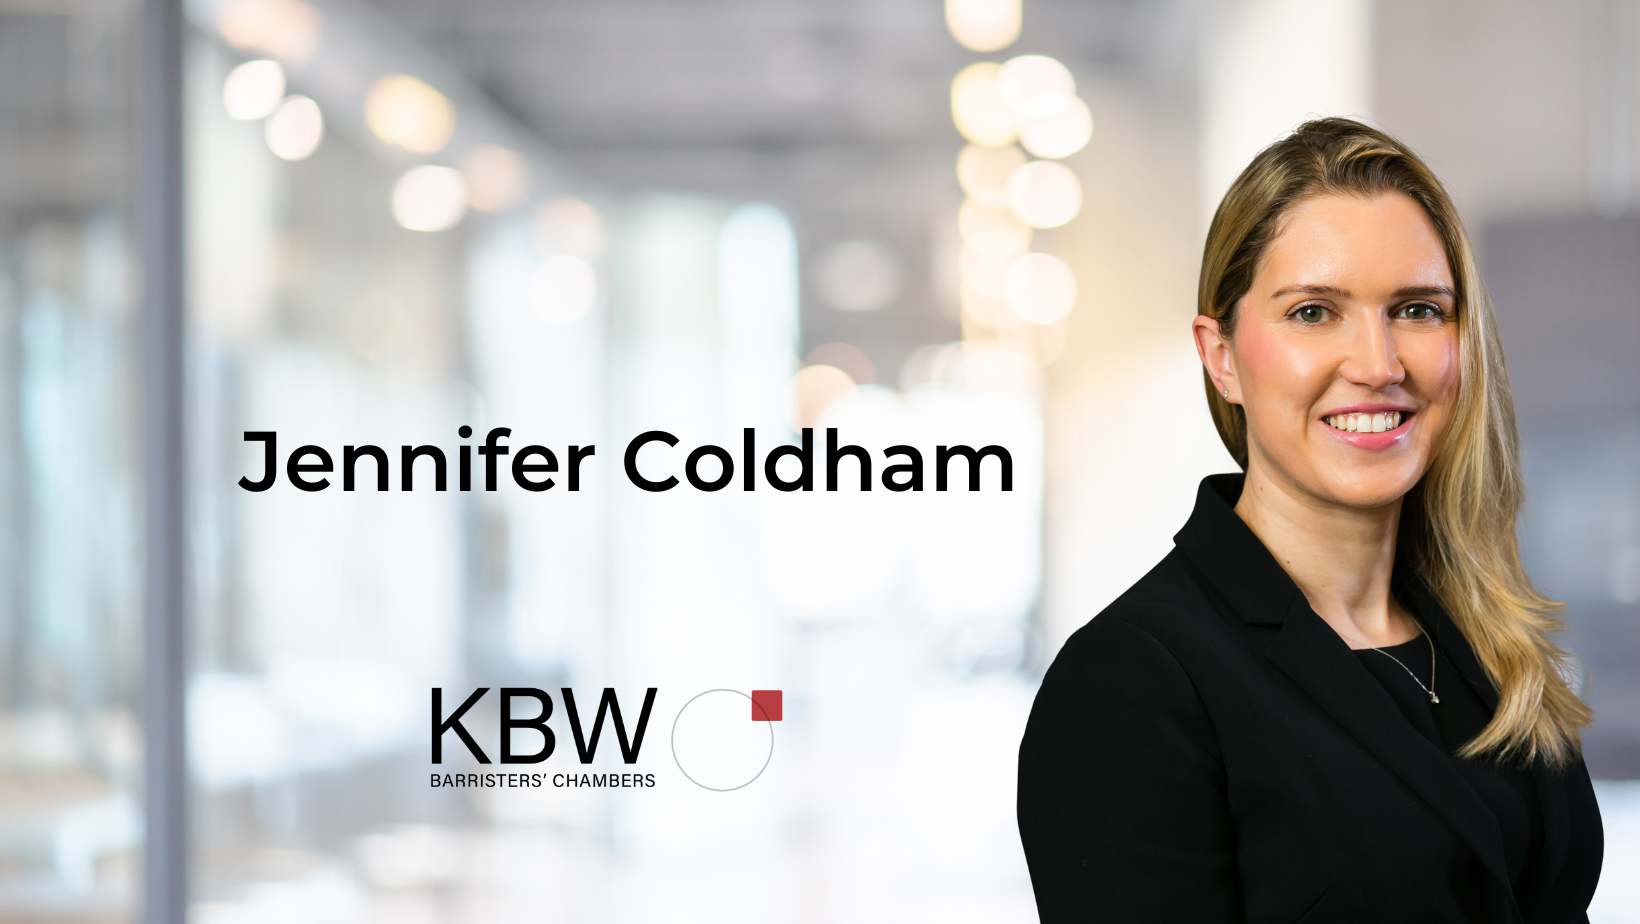 Jennifer Coldham secured orders for the forfeiture of a quarter of a million pounds, subject to account freezing orders, following a contested civil POCA hearing.